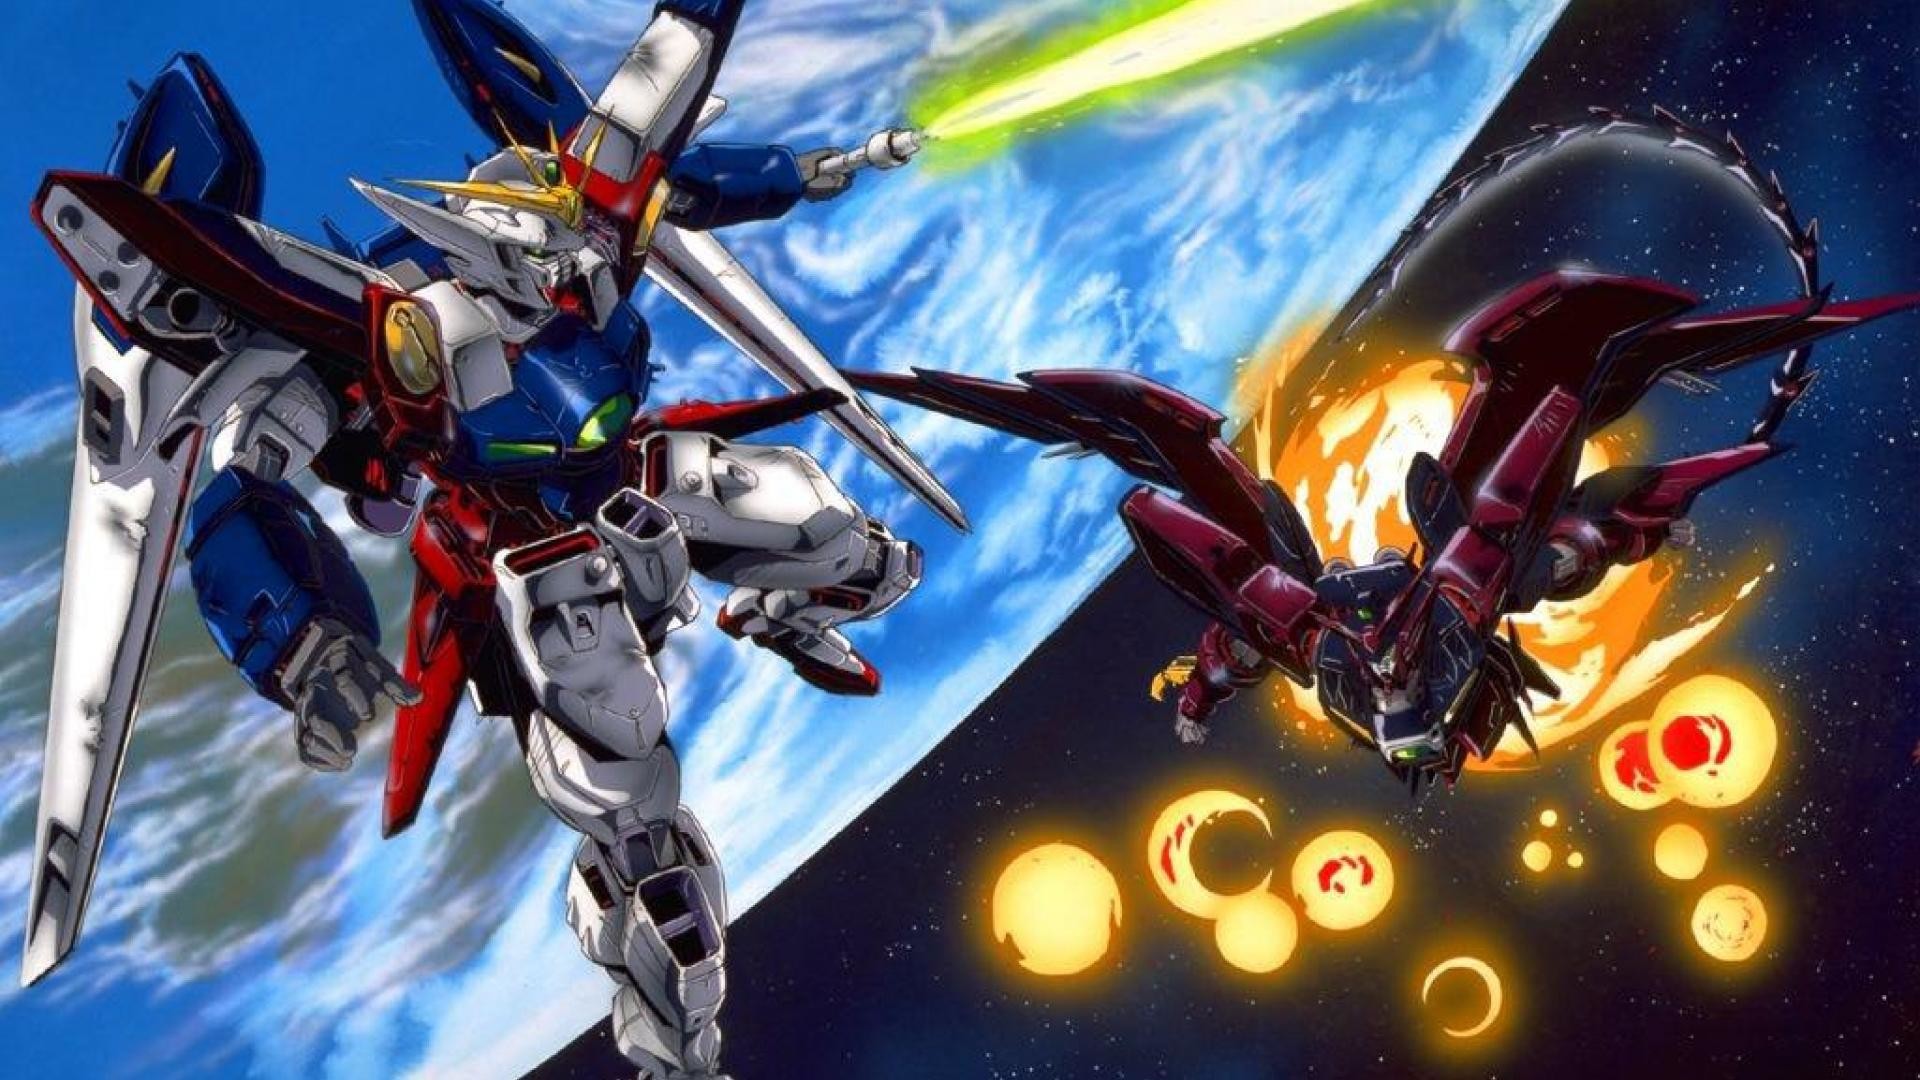 1920x1080 Anime Wallpapers Gundam HD 4K Download For Mobile iPhone & PC